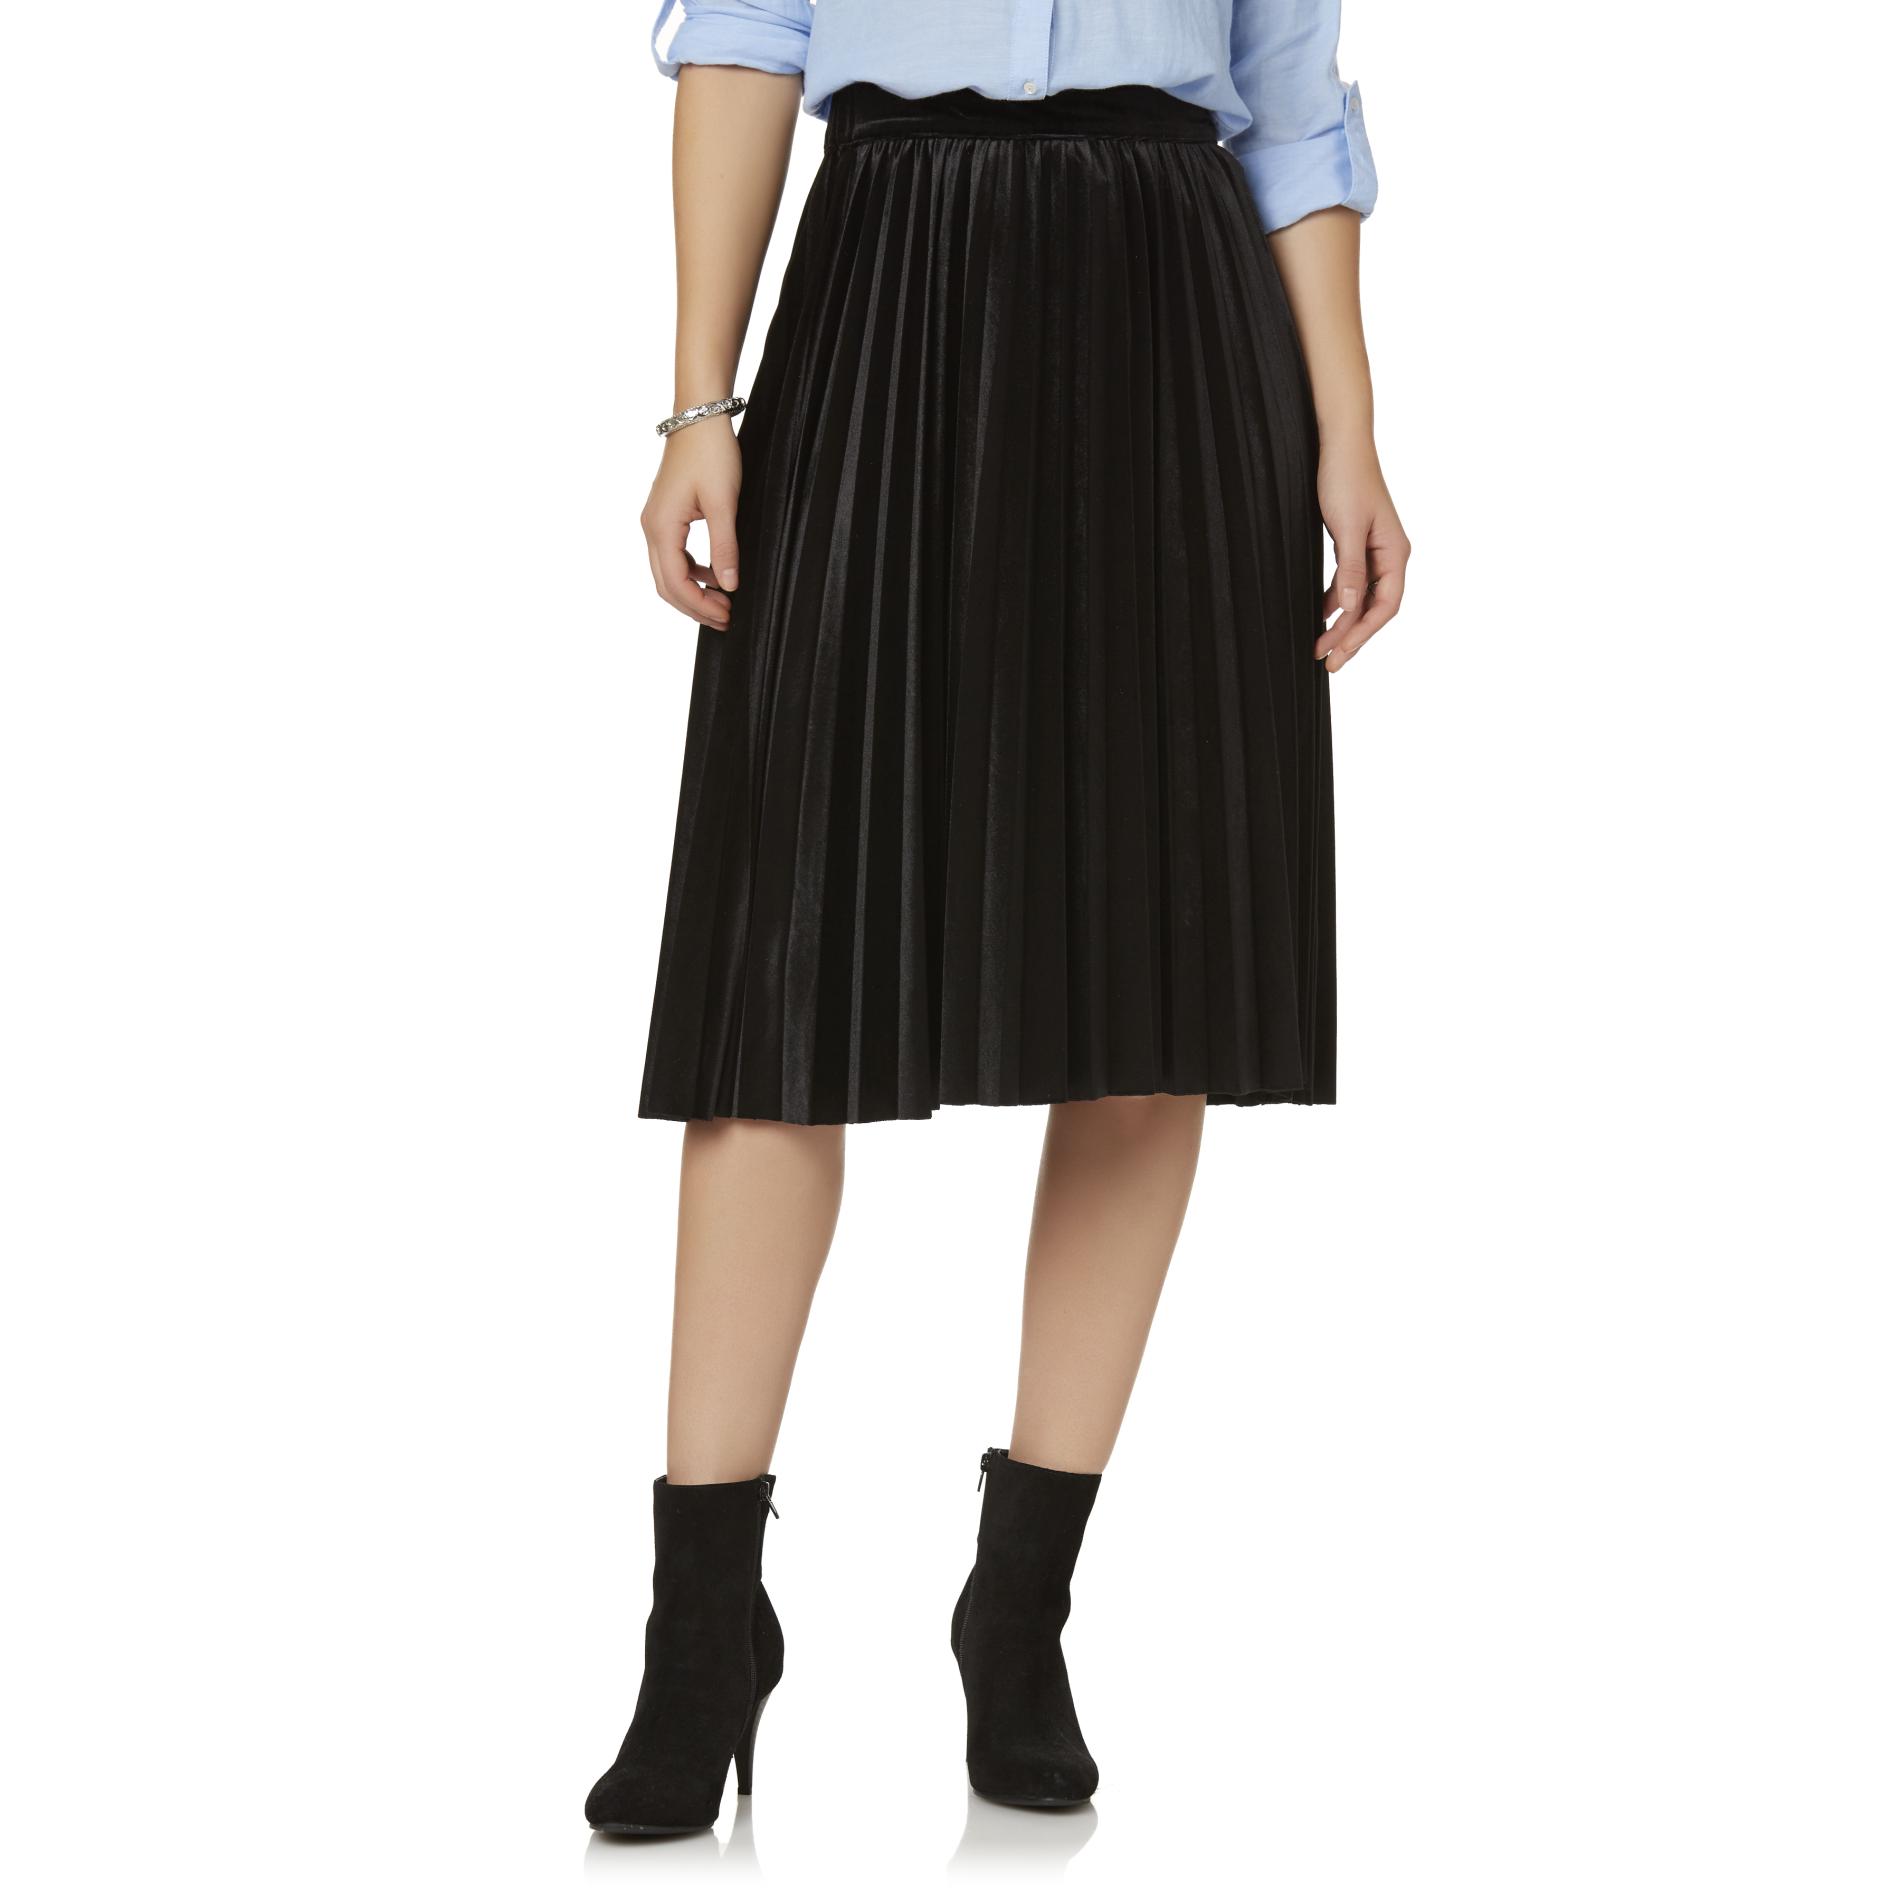 Simply Styled Petites' Pleated Velour Skirt